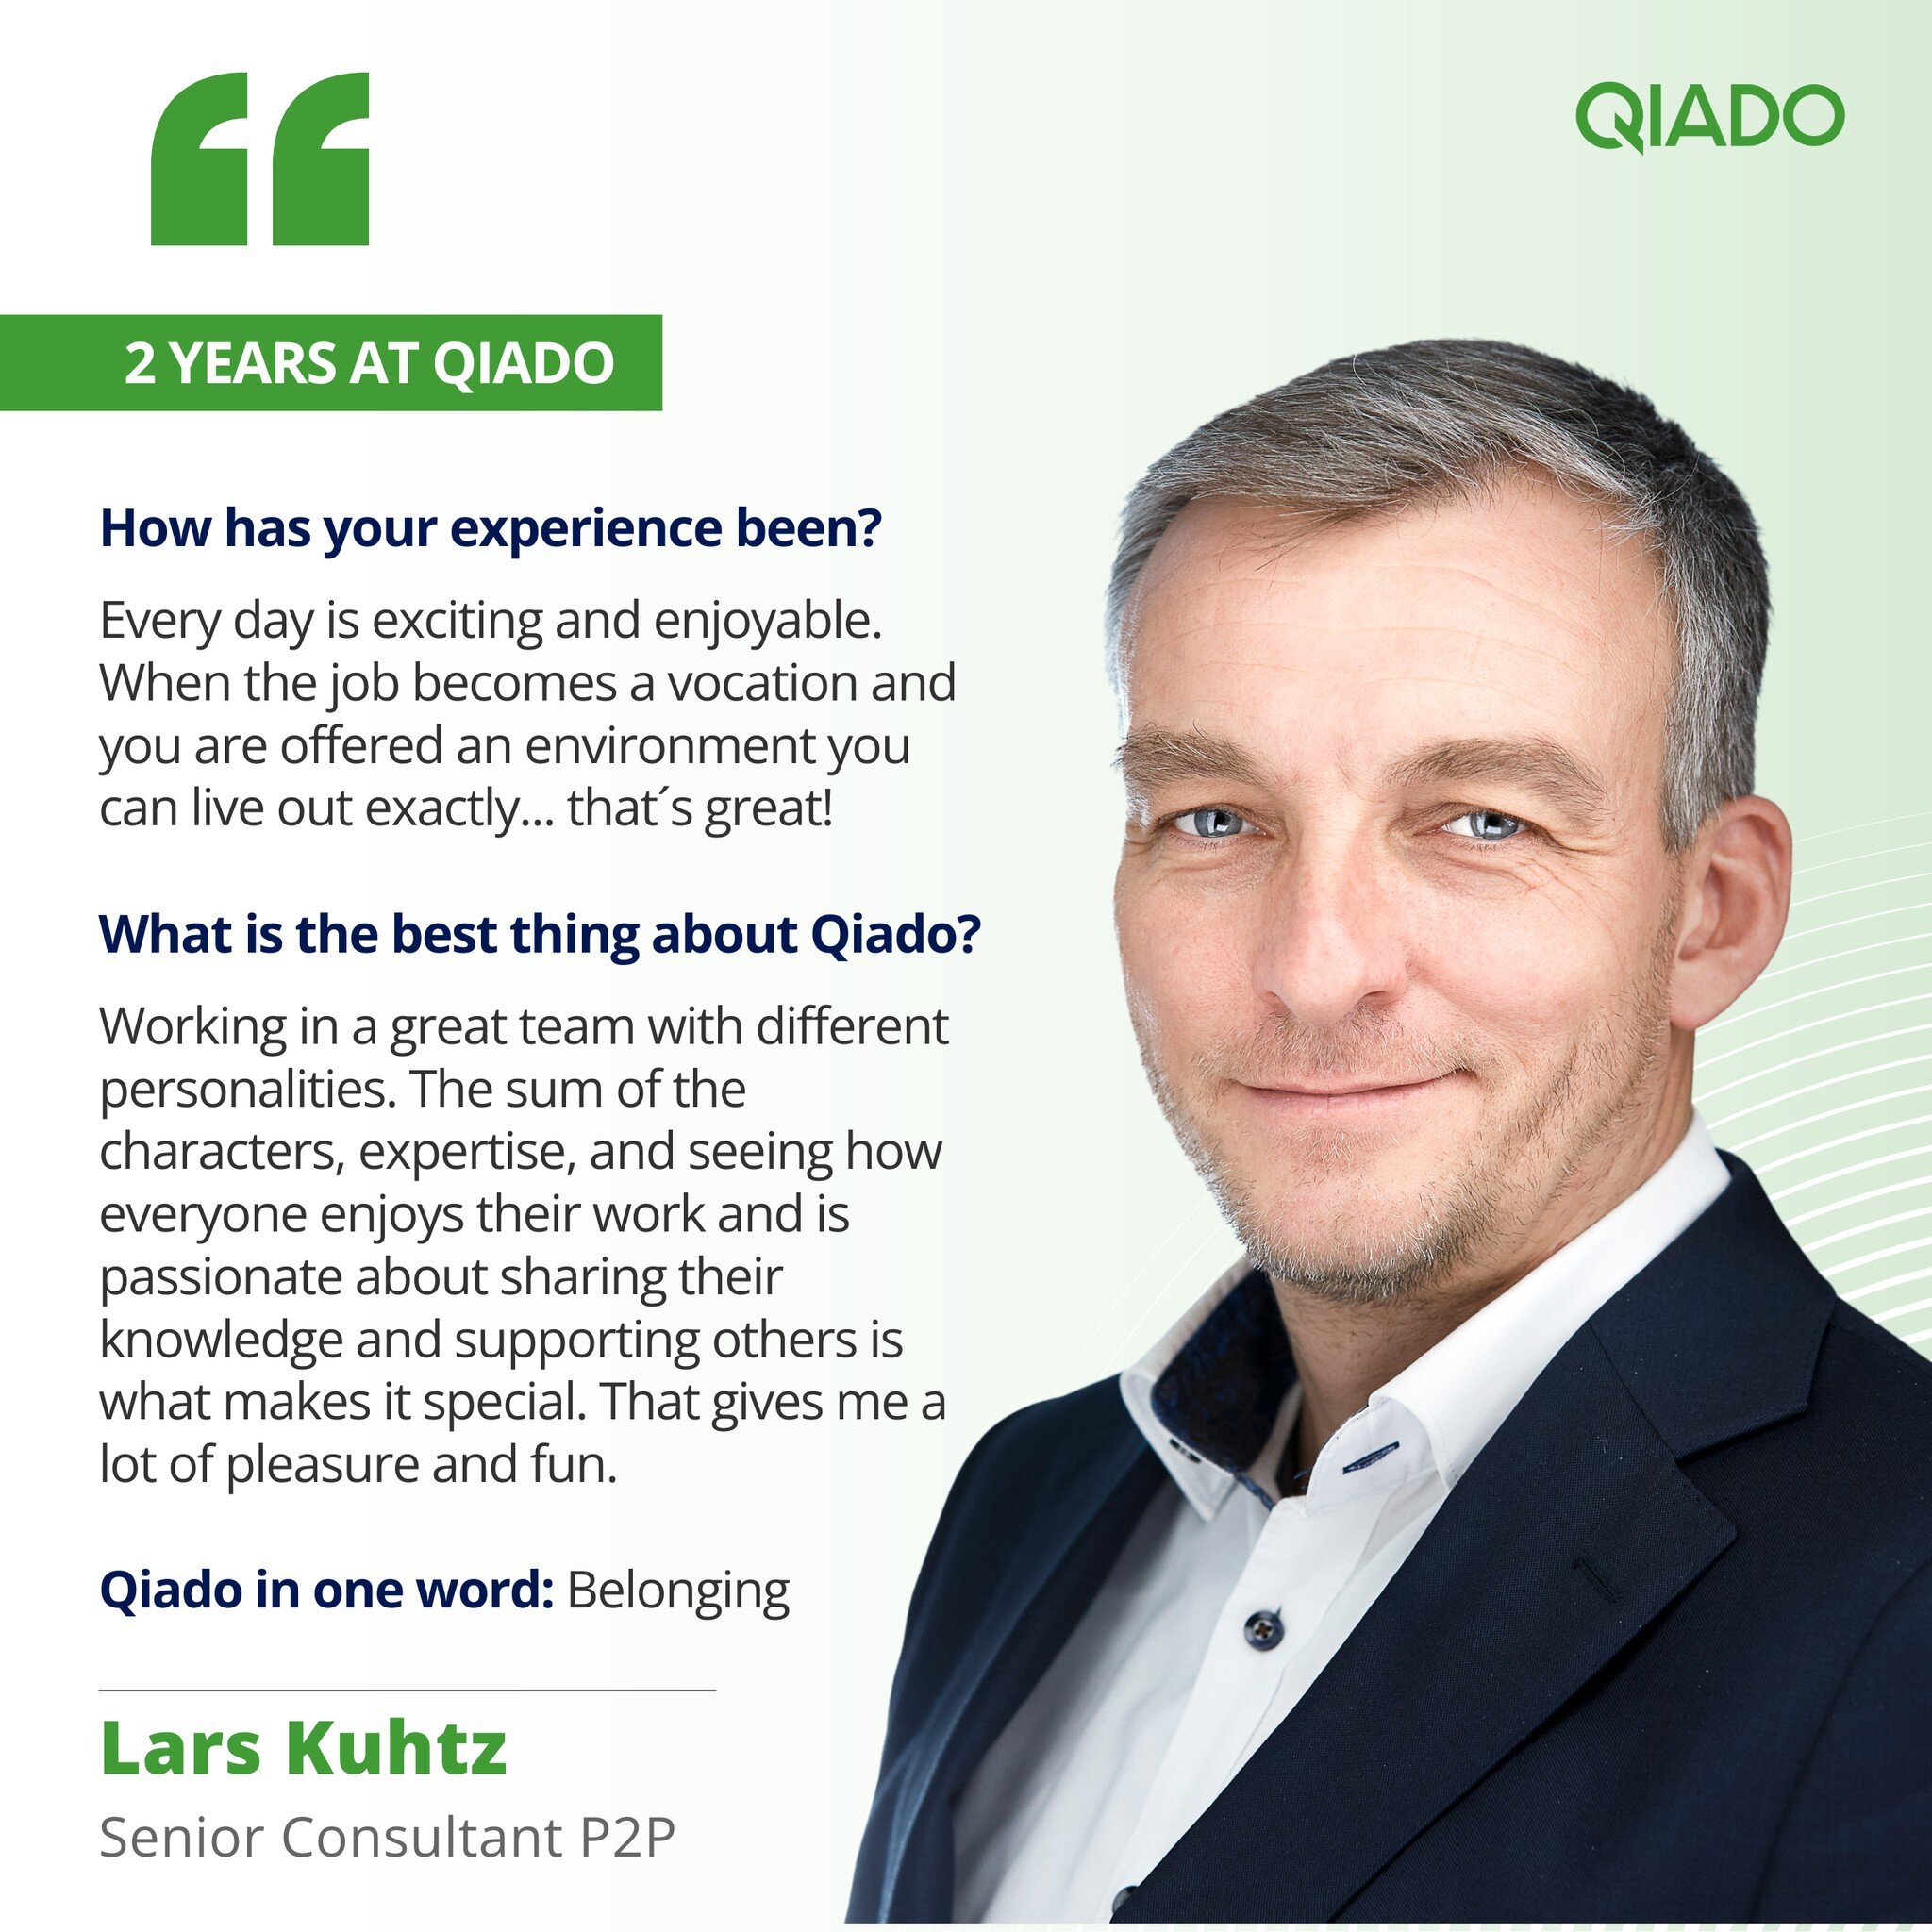 Lars Kuhtz definely brings light and joy to our offices in Bavaria! 🎉 We proudly celebrate his second work anniversary at #Qiado, an example of a great technical and cultural match! We are happy to have him in our daily #FinanceIT journey. Let&acute